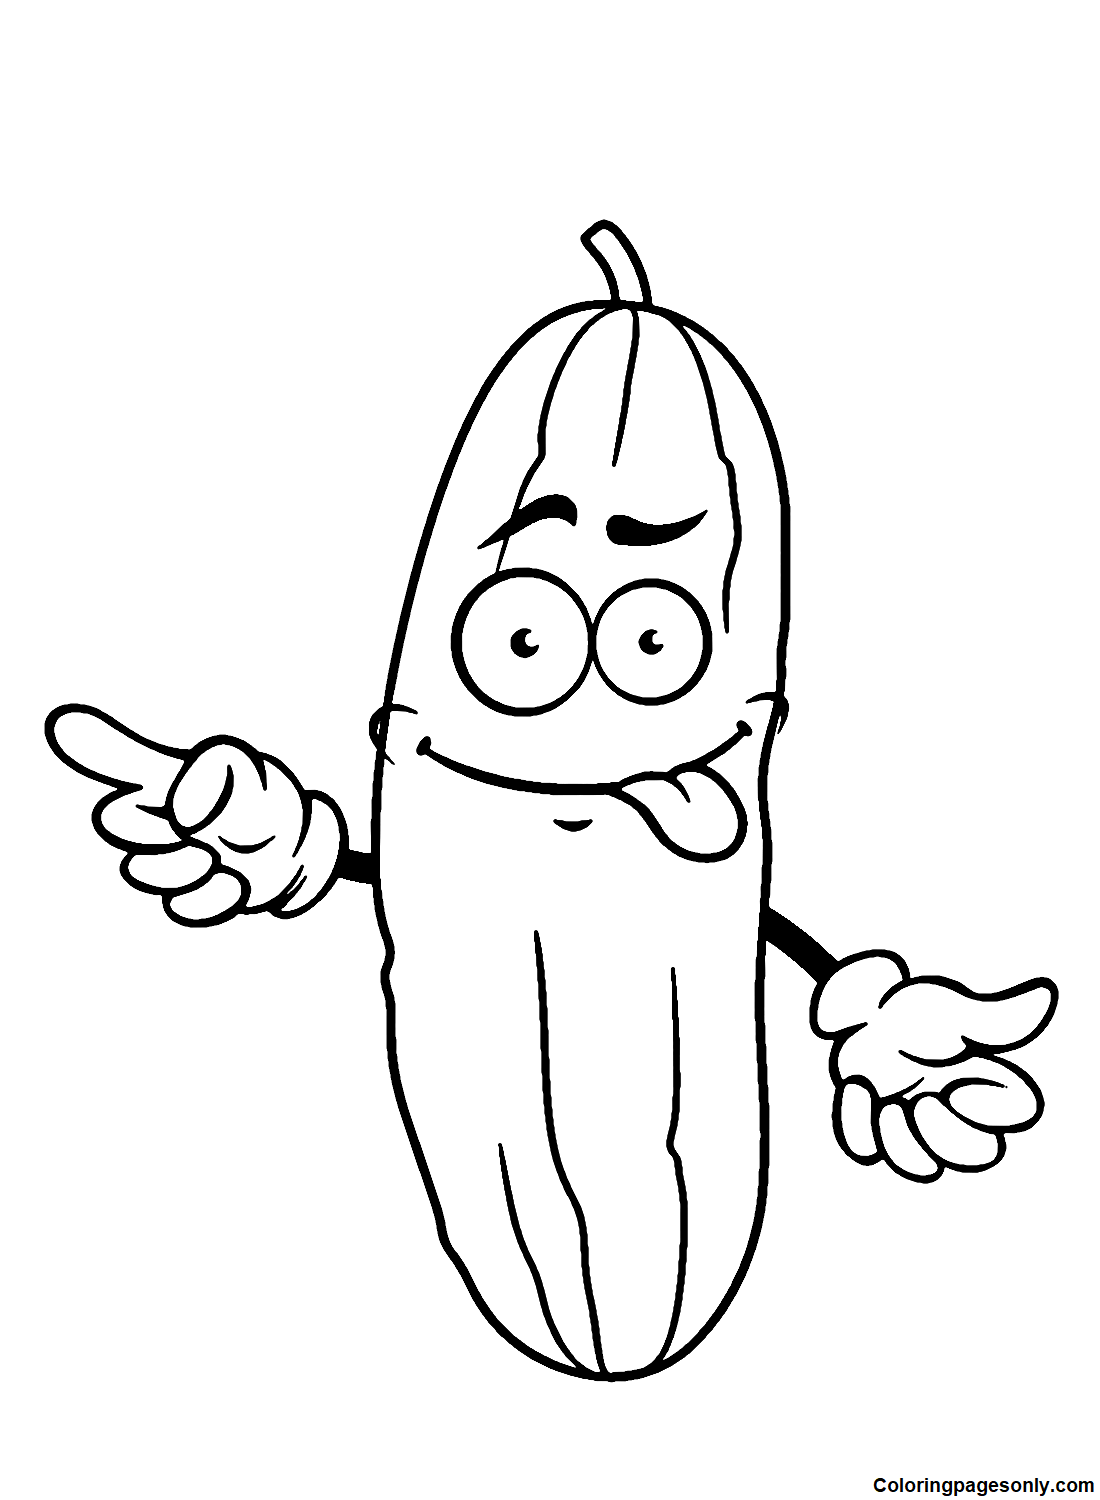 Funny Cucumber for Kids Coloring Pages